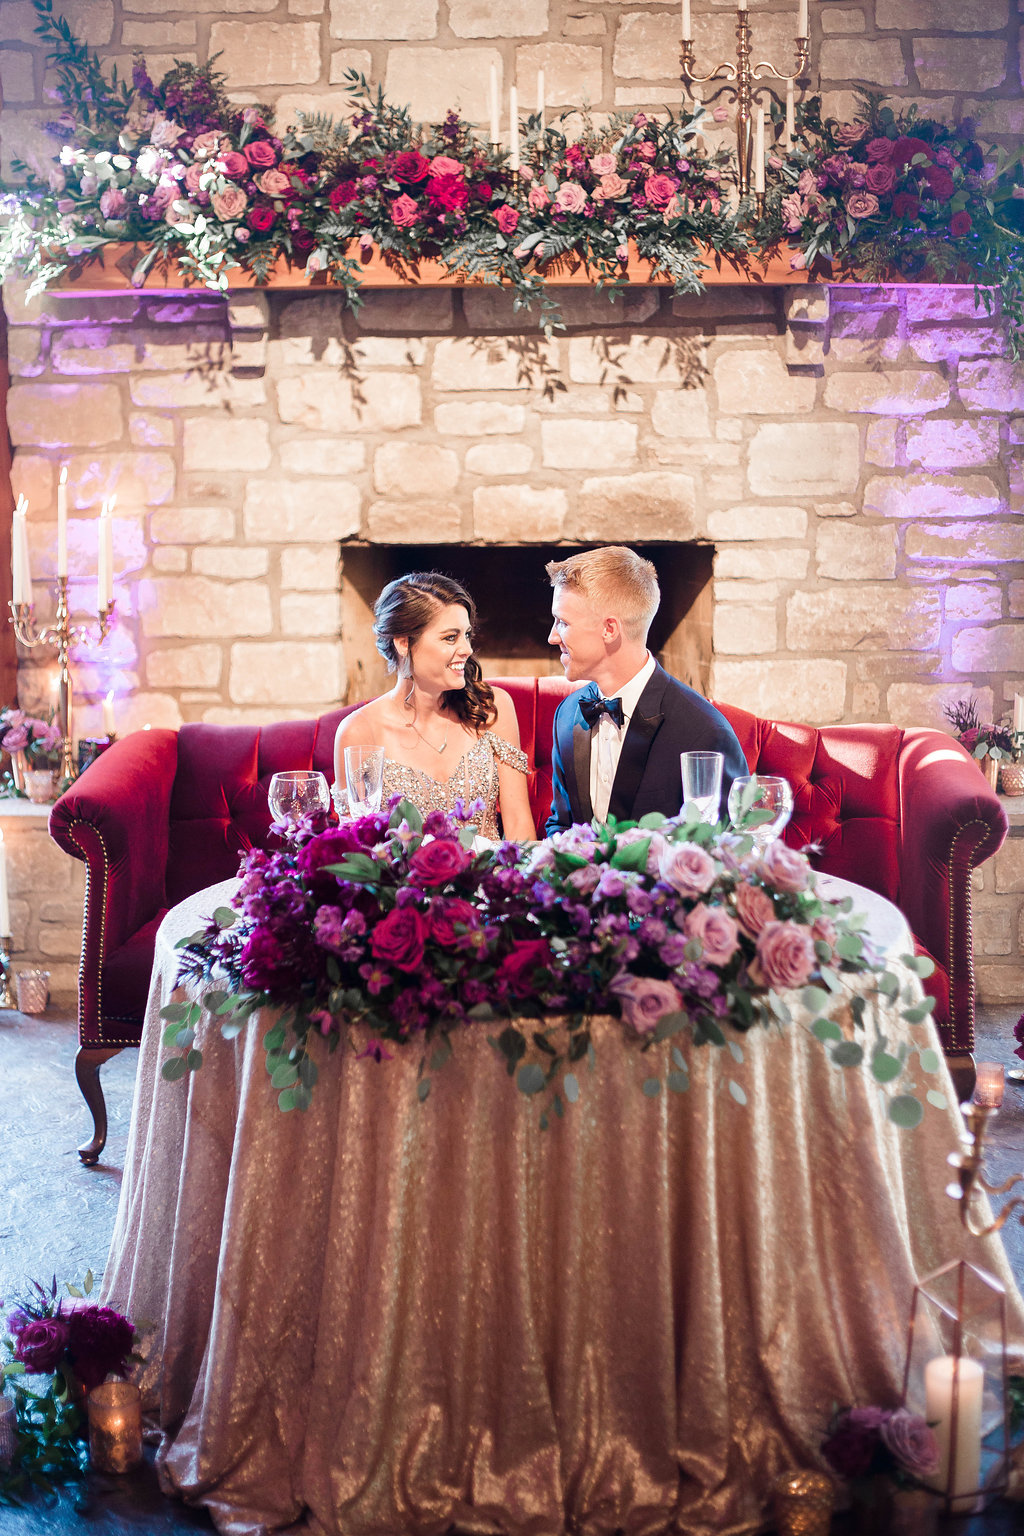 Sweetheart Seating at Wedding with Gold Table Linen